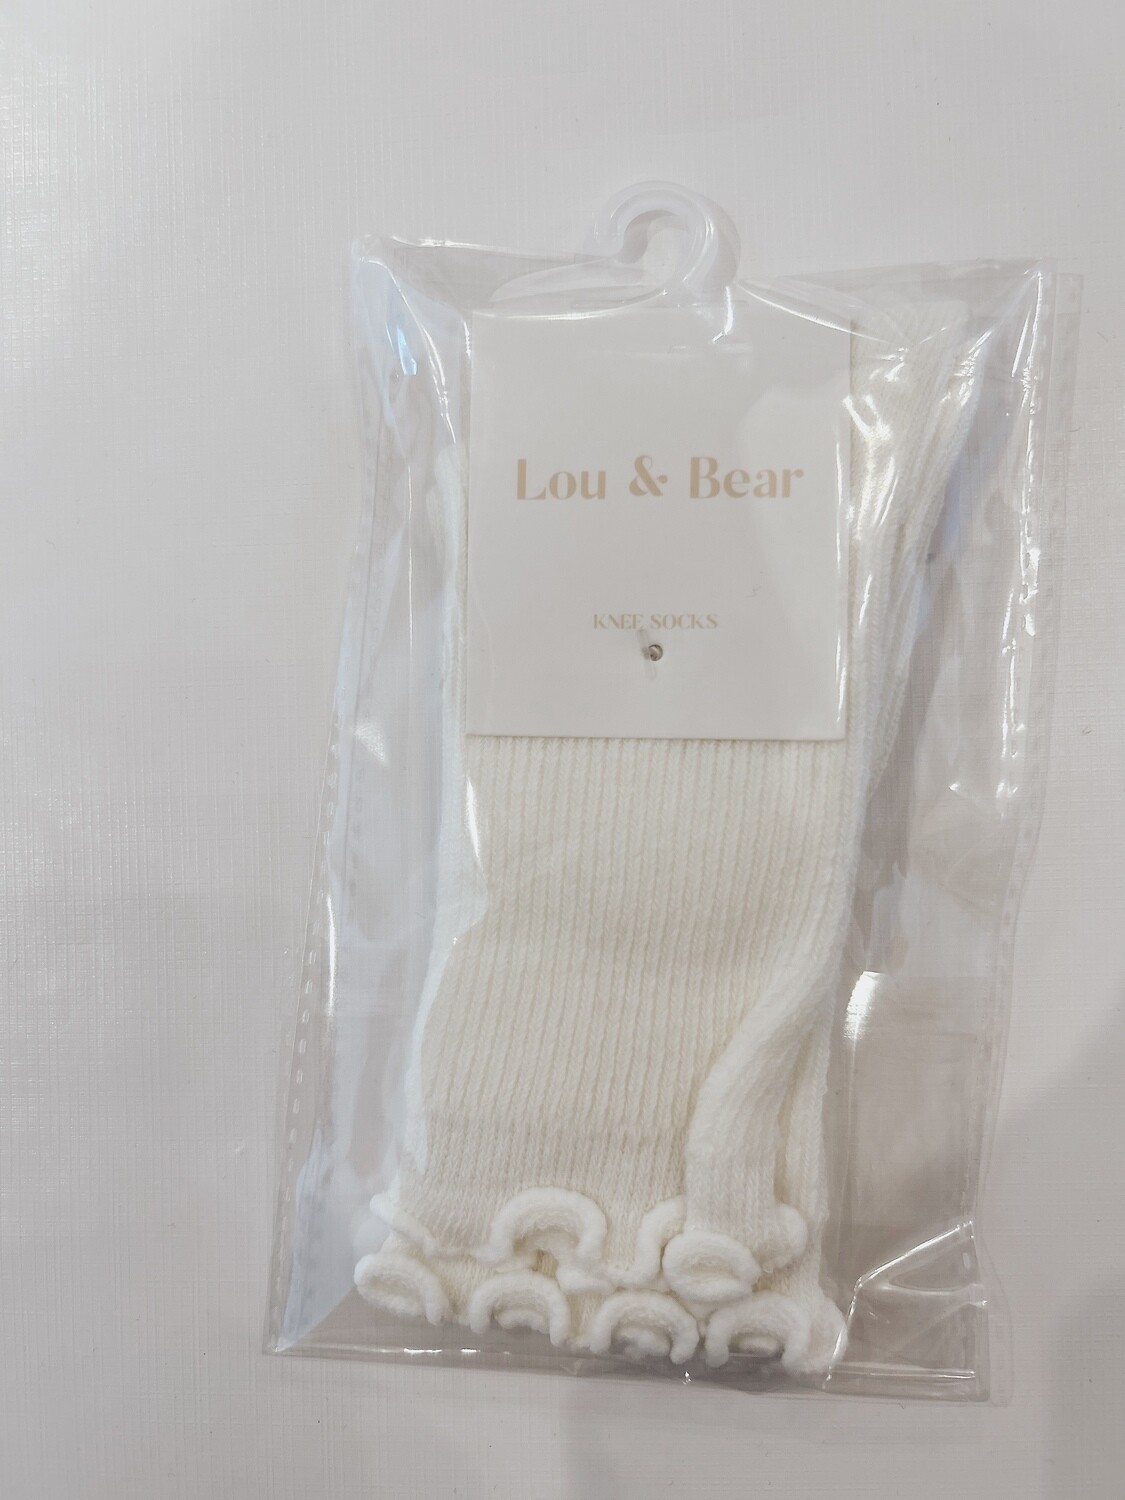 Ruffle Ribbed Knee Socks, Color: Cream, Size: M (1-3Y)